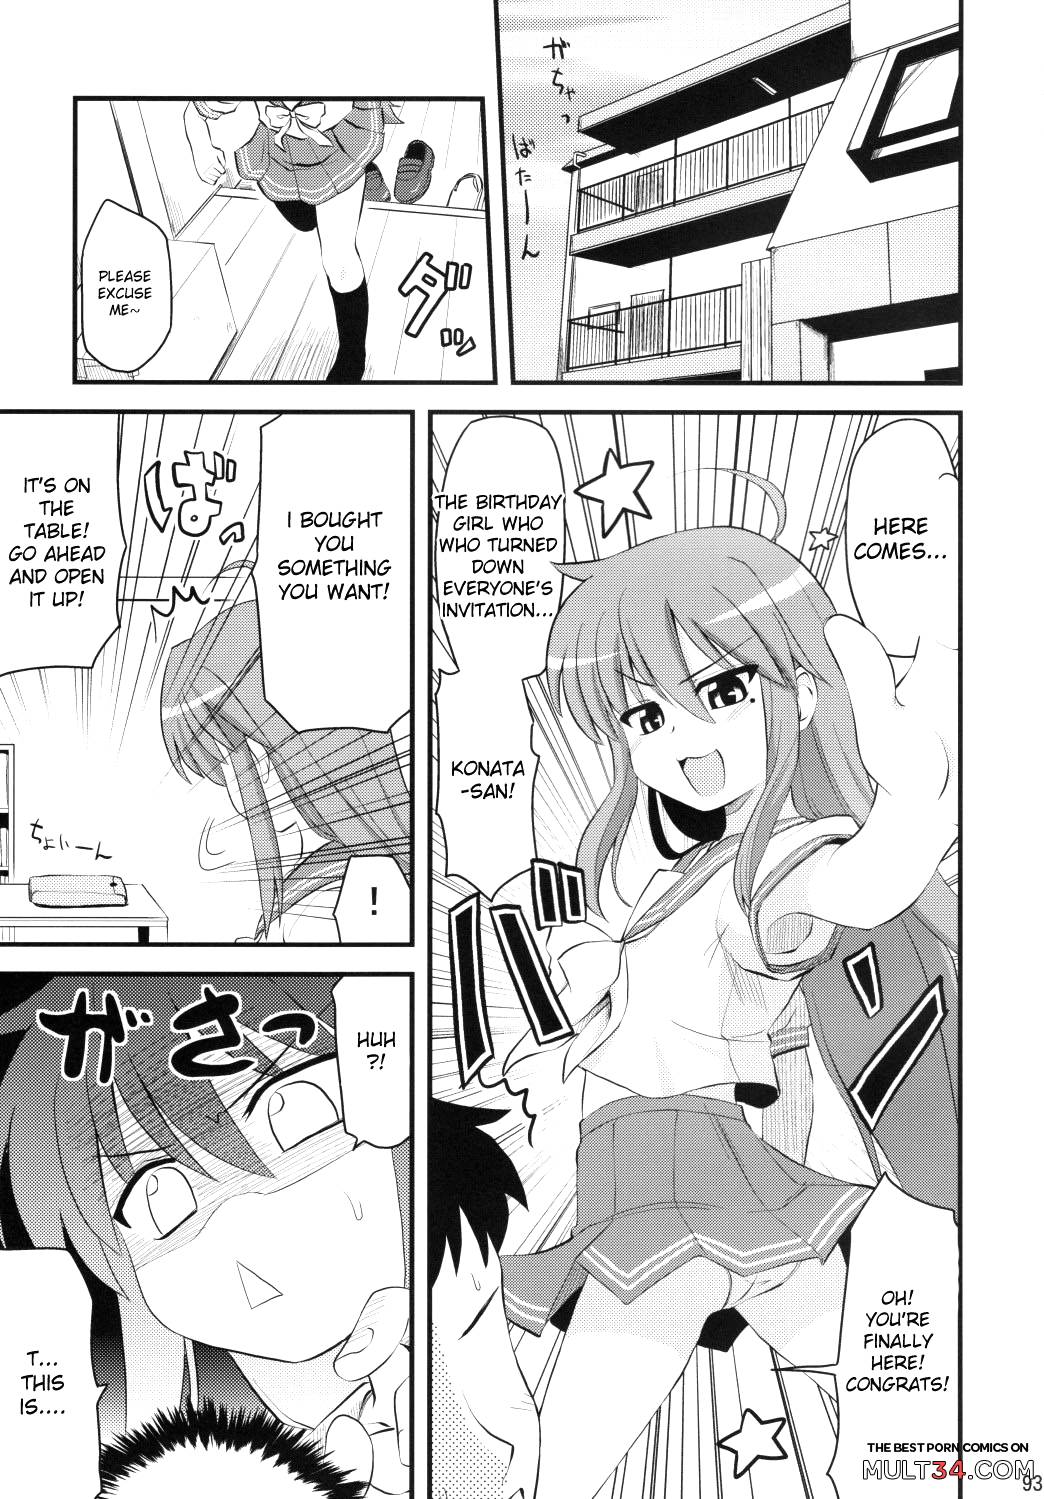 Konata and Oh-zu 4 people each and every one + 1 page 73